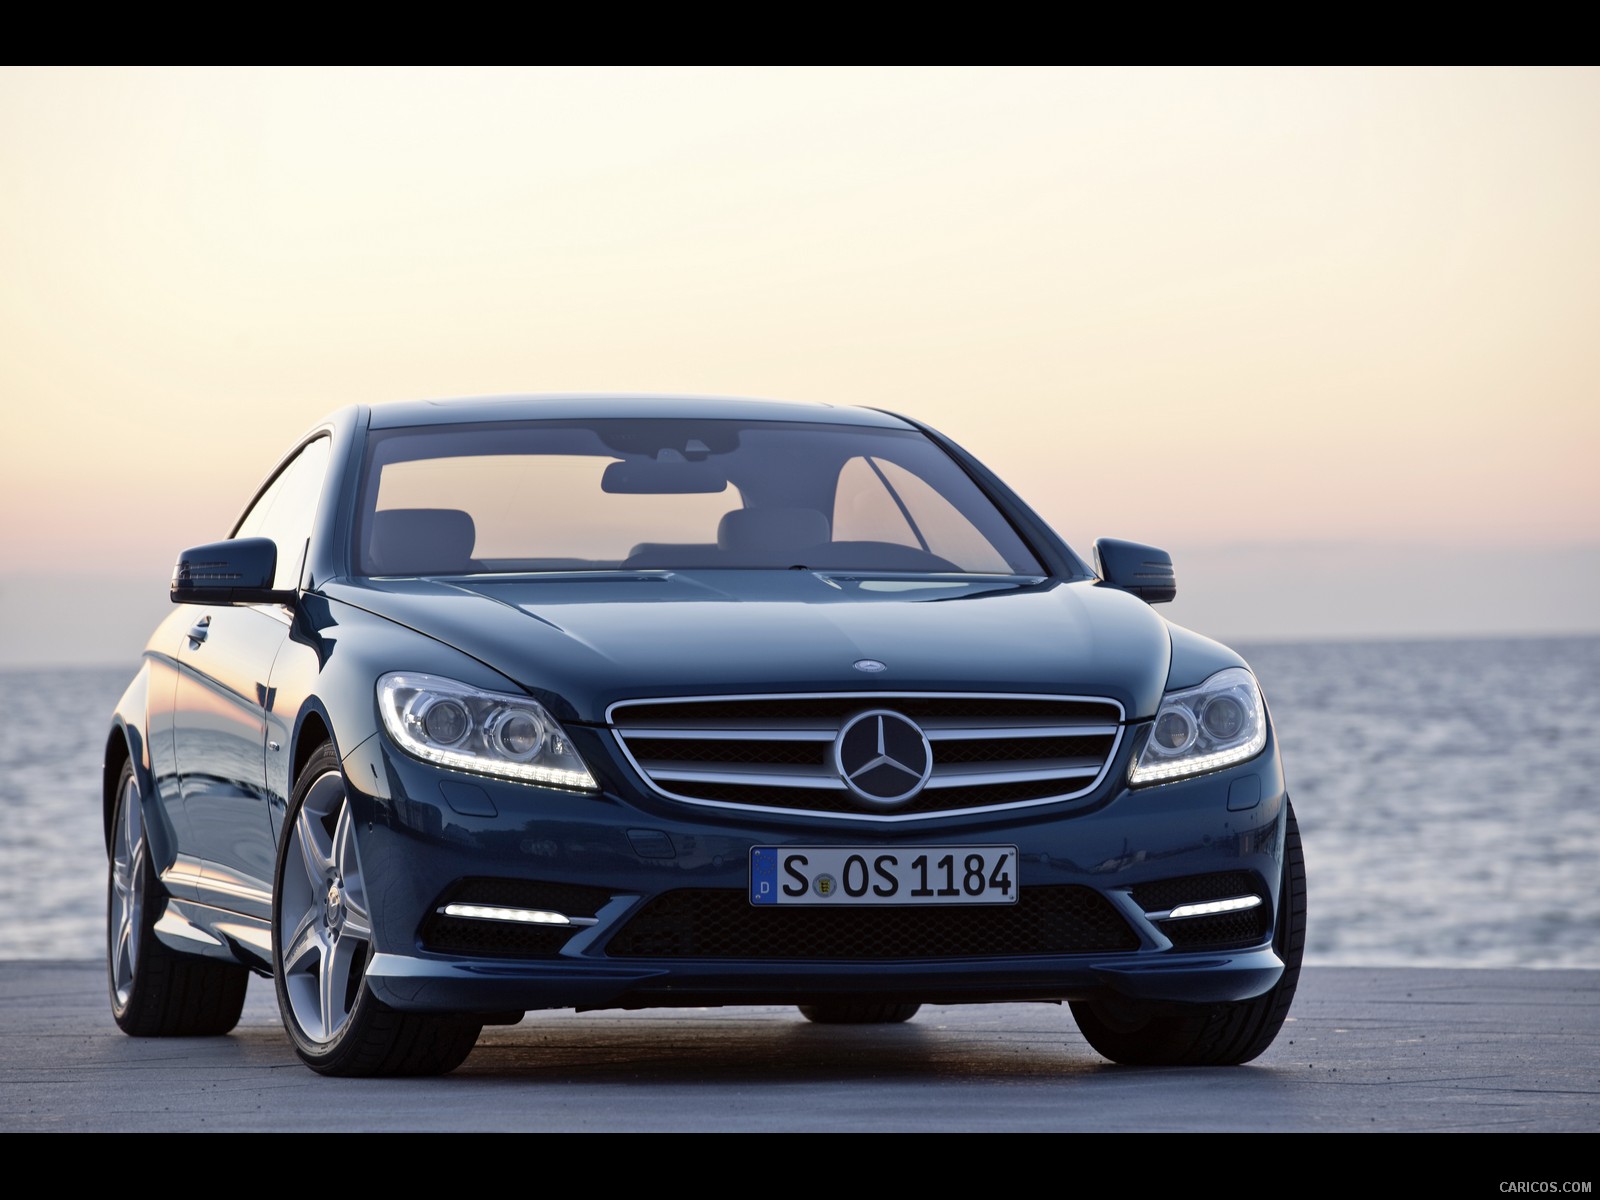 Mercedes Benz CL-Class (2011)  - Front Angle , #10 of 34